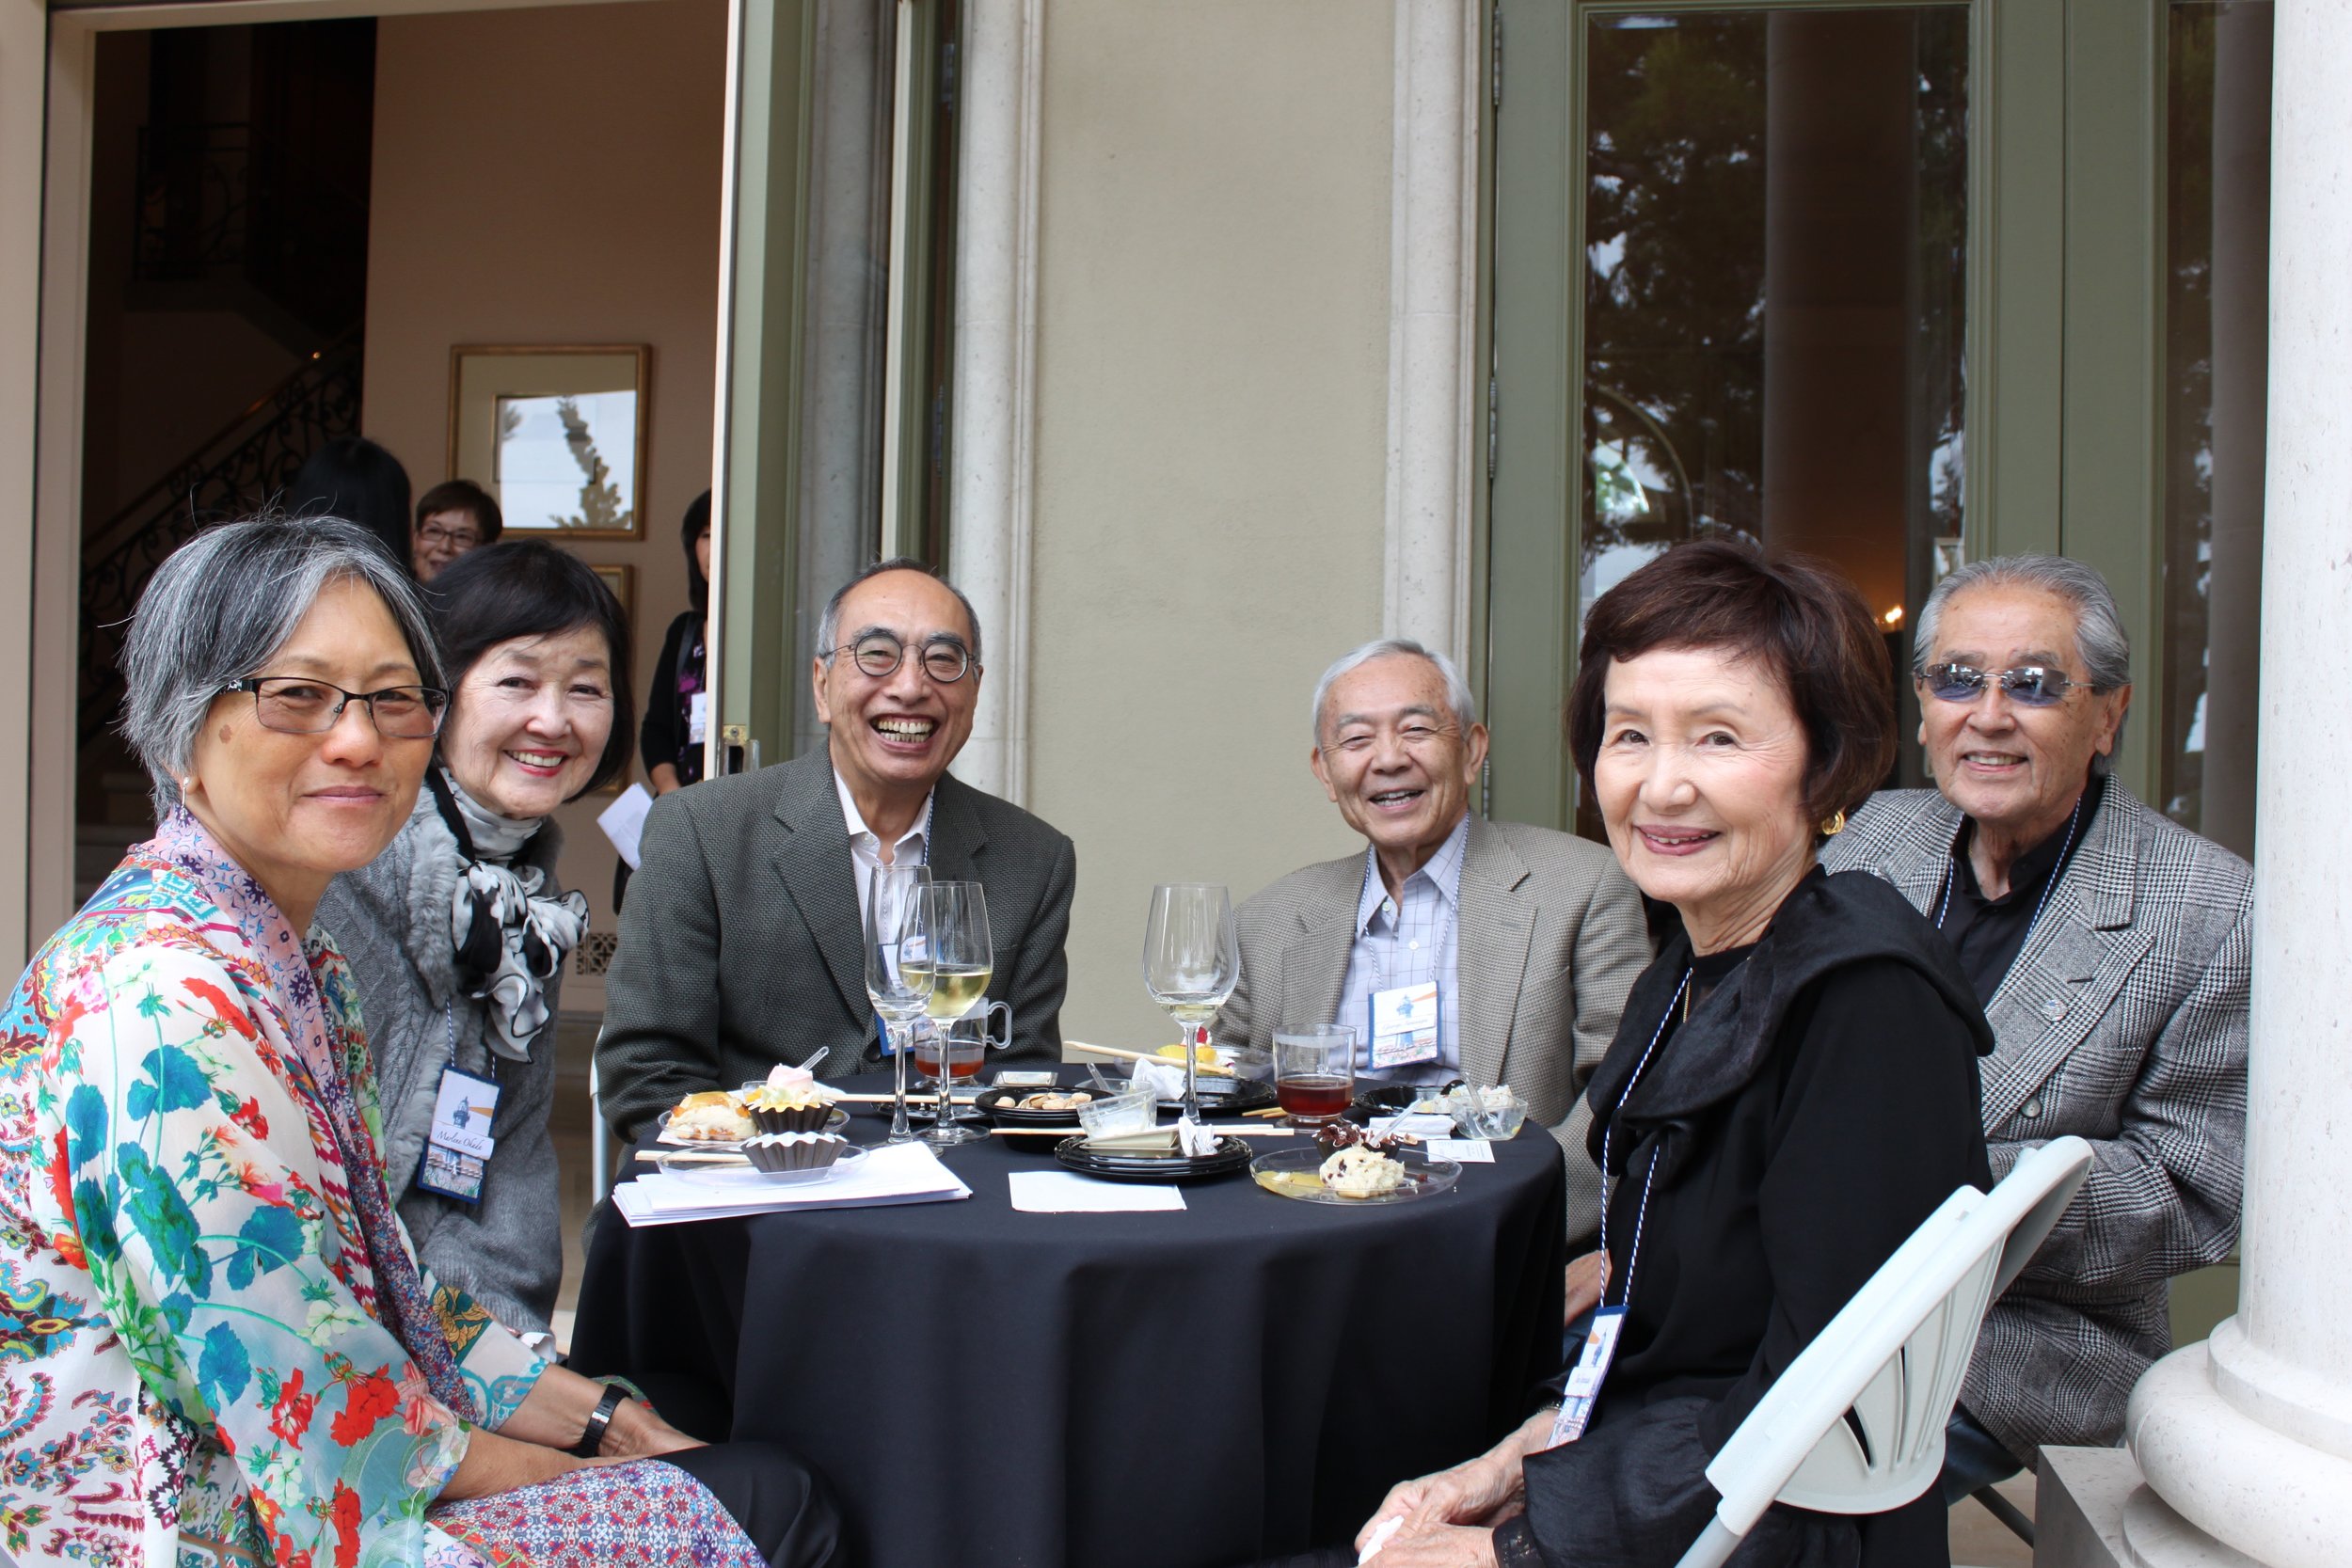 A group of Asian older men and women smile while seated at a round table together. 